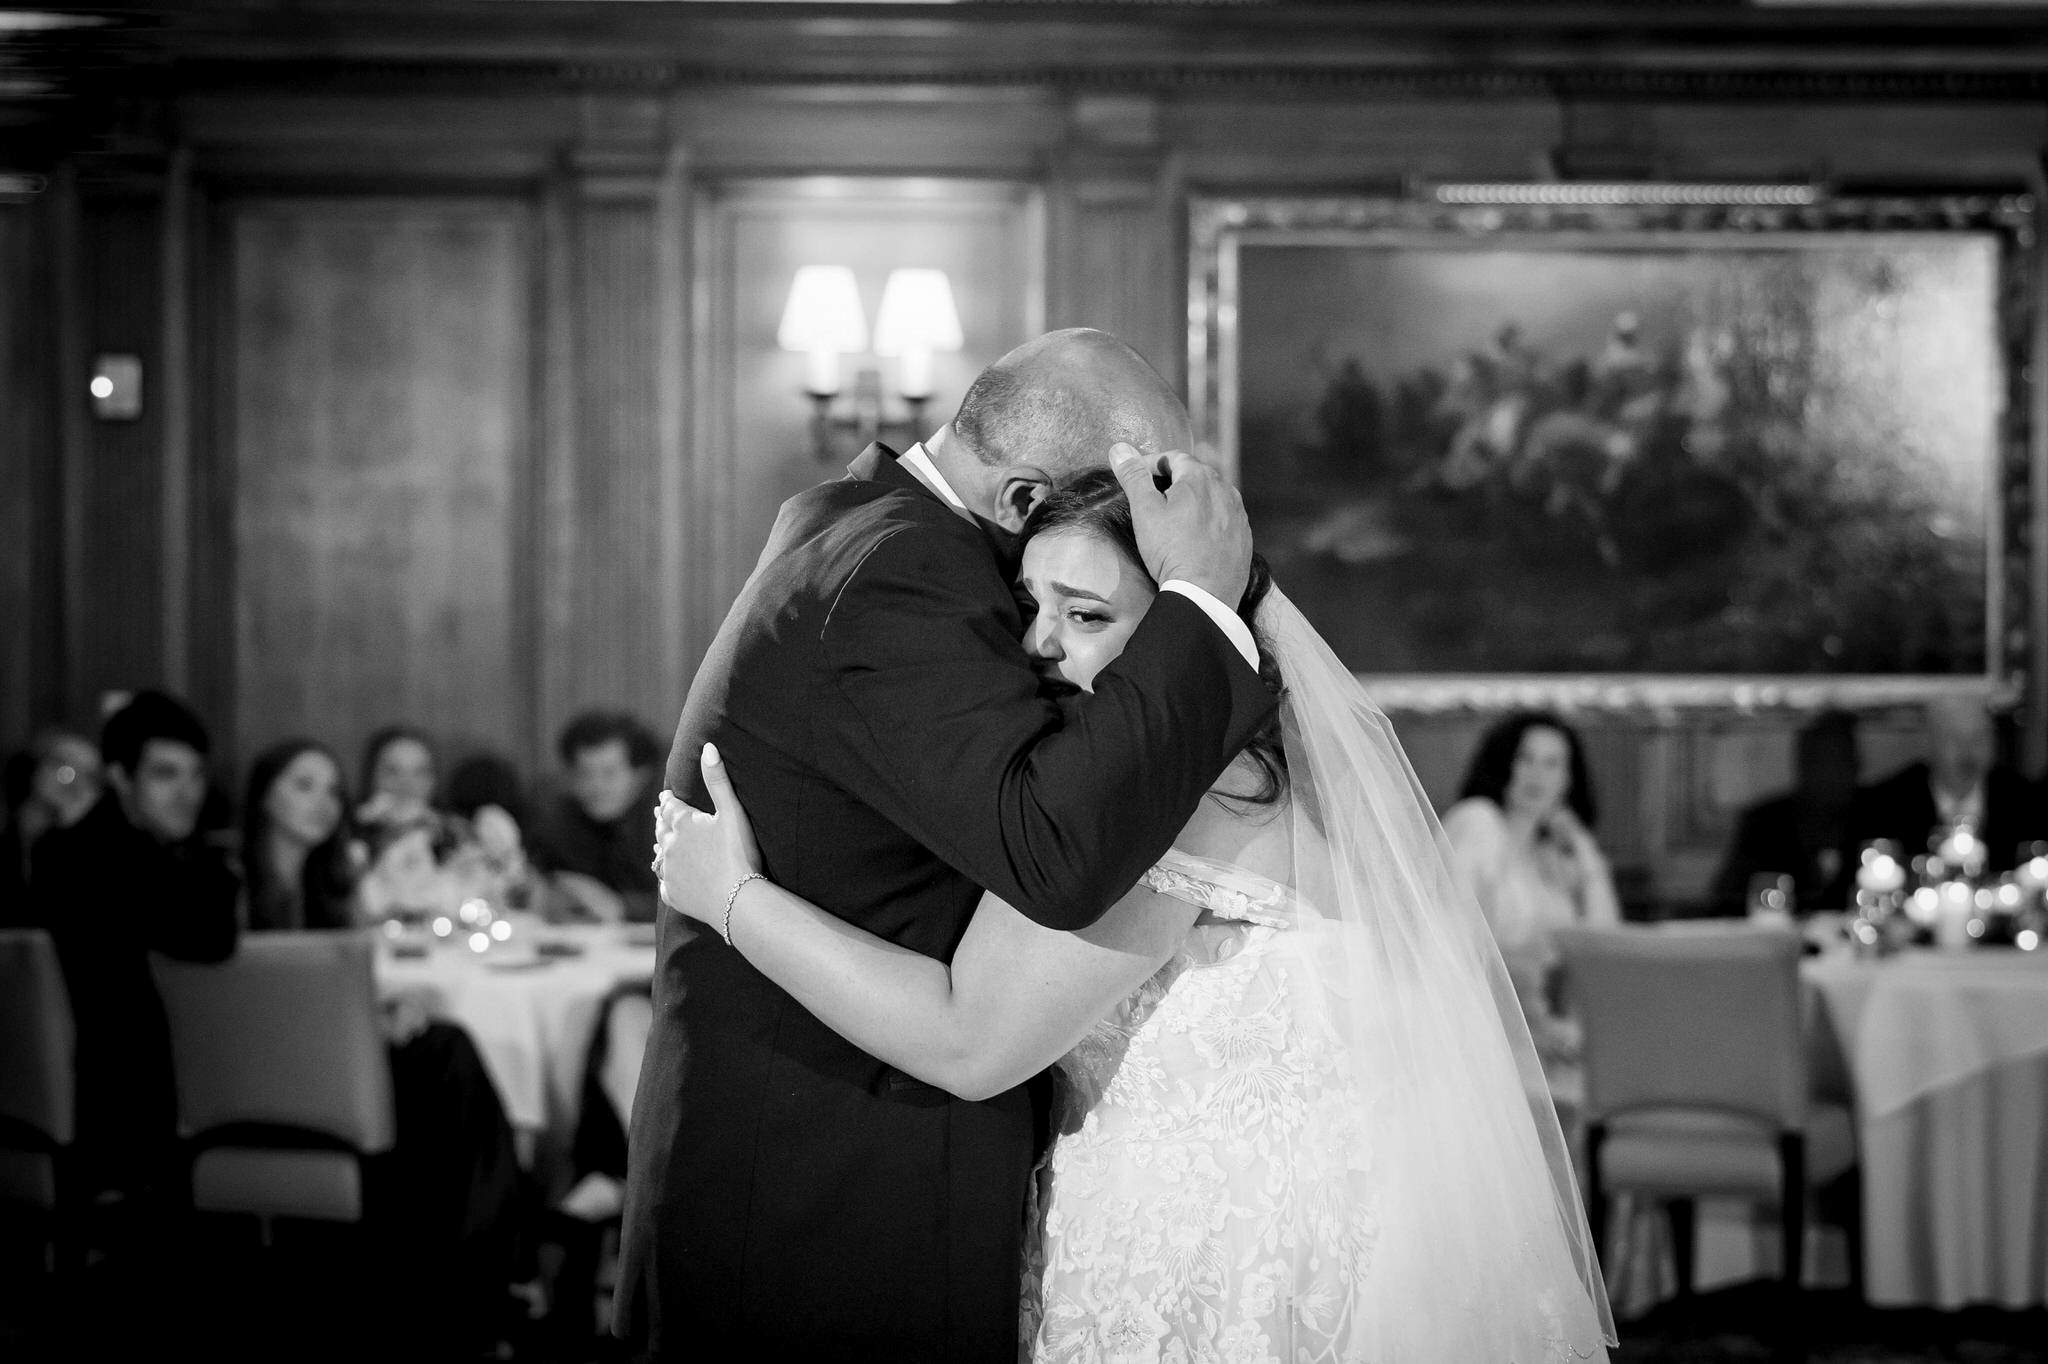 The father of the bride hugs his daughter during their slow dance at a Detroit Athletic Club wedding.